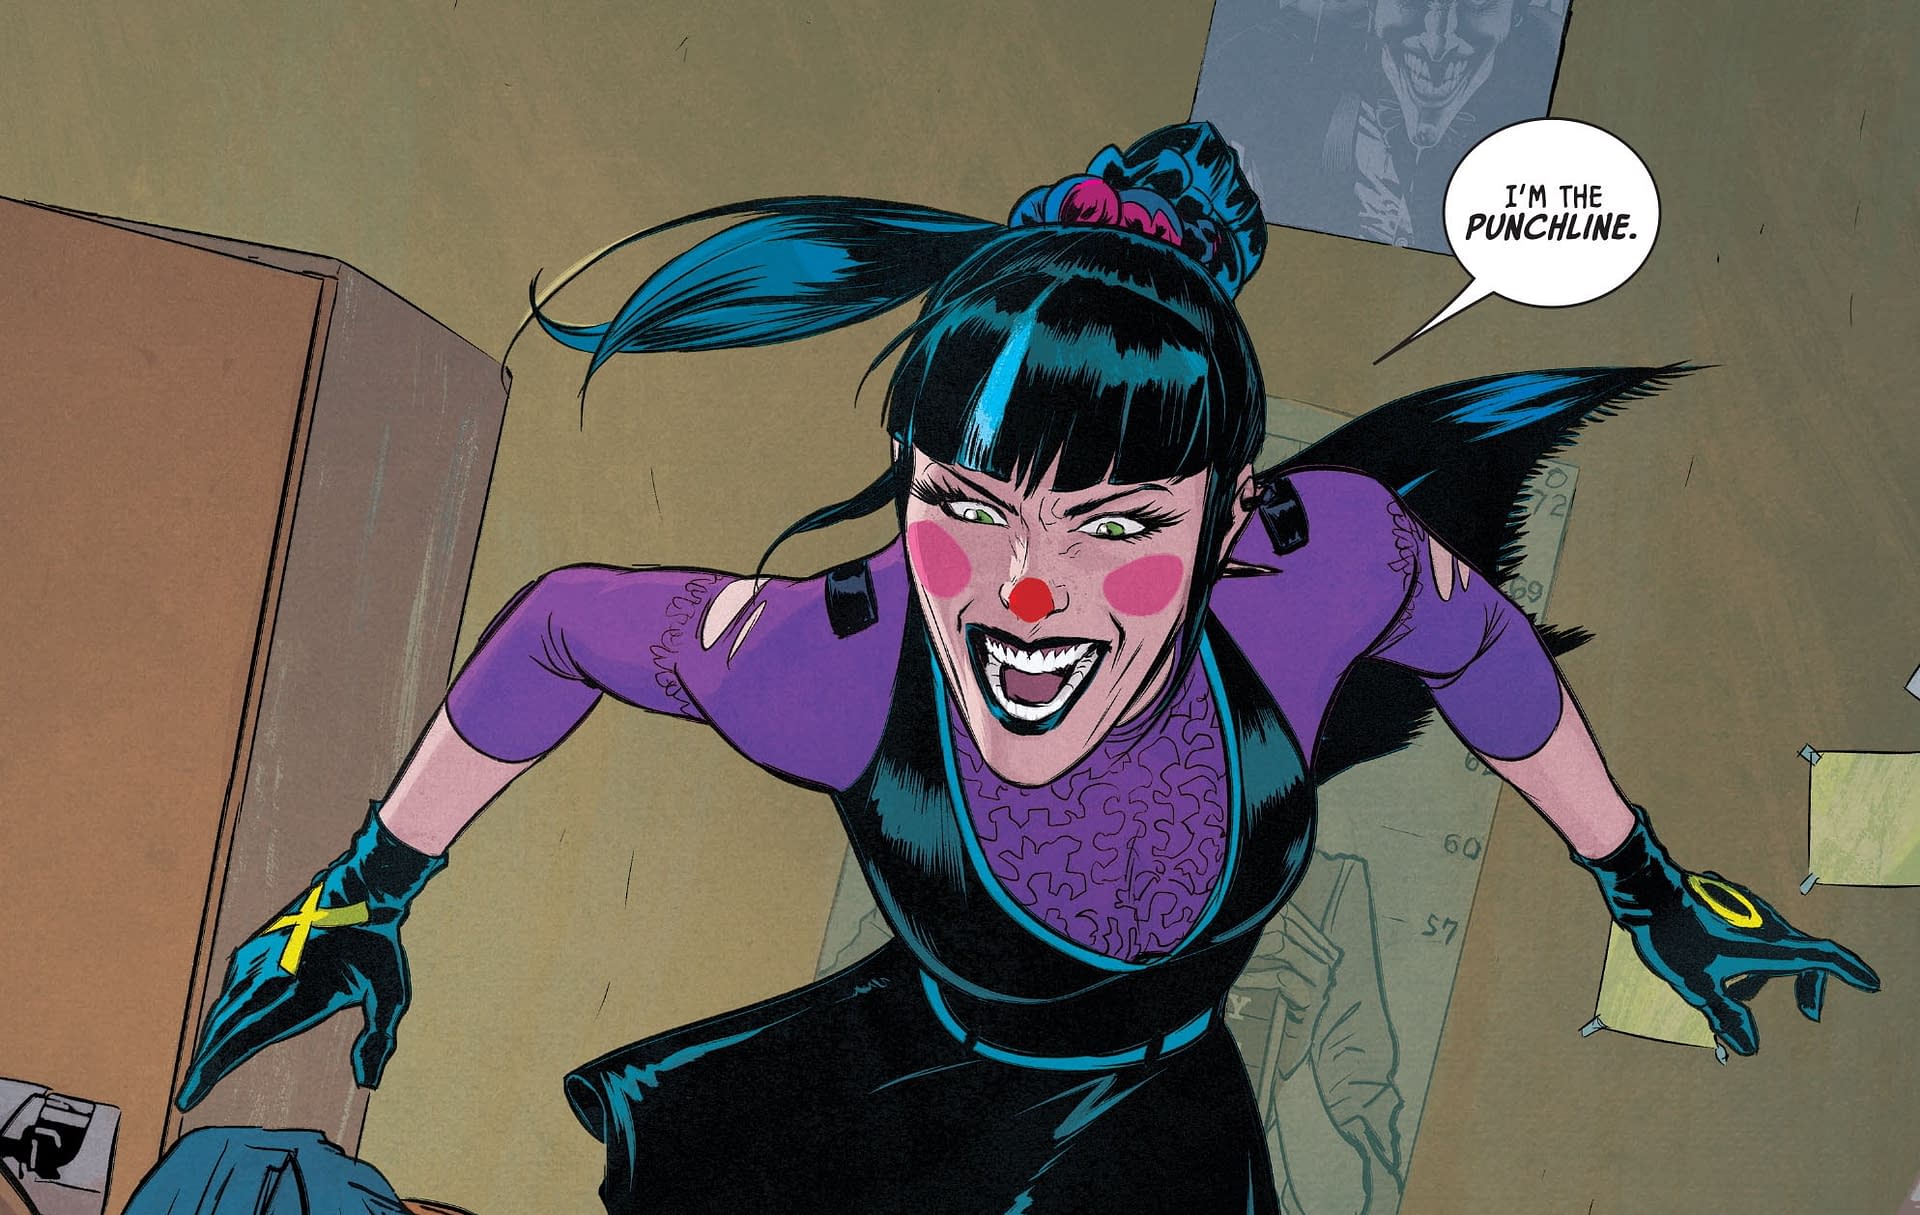 Who Is Punchline, Where Does She Come From? Batman, Joker Spoilers